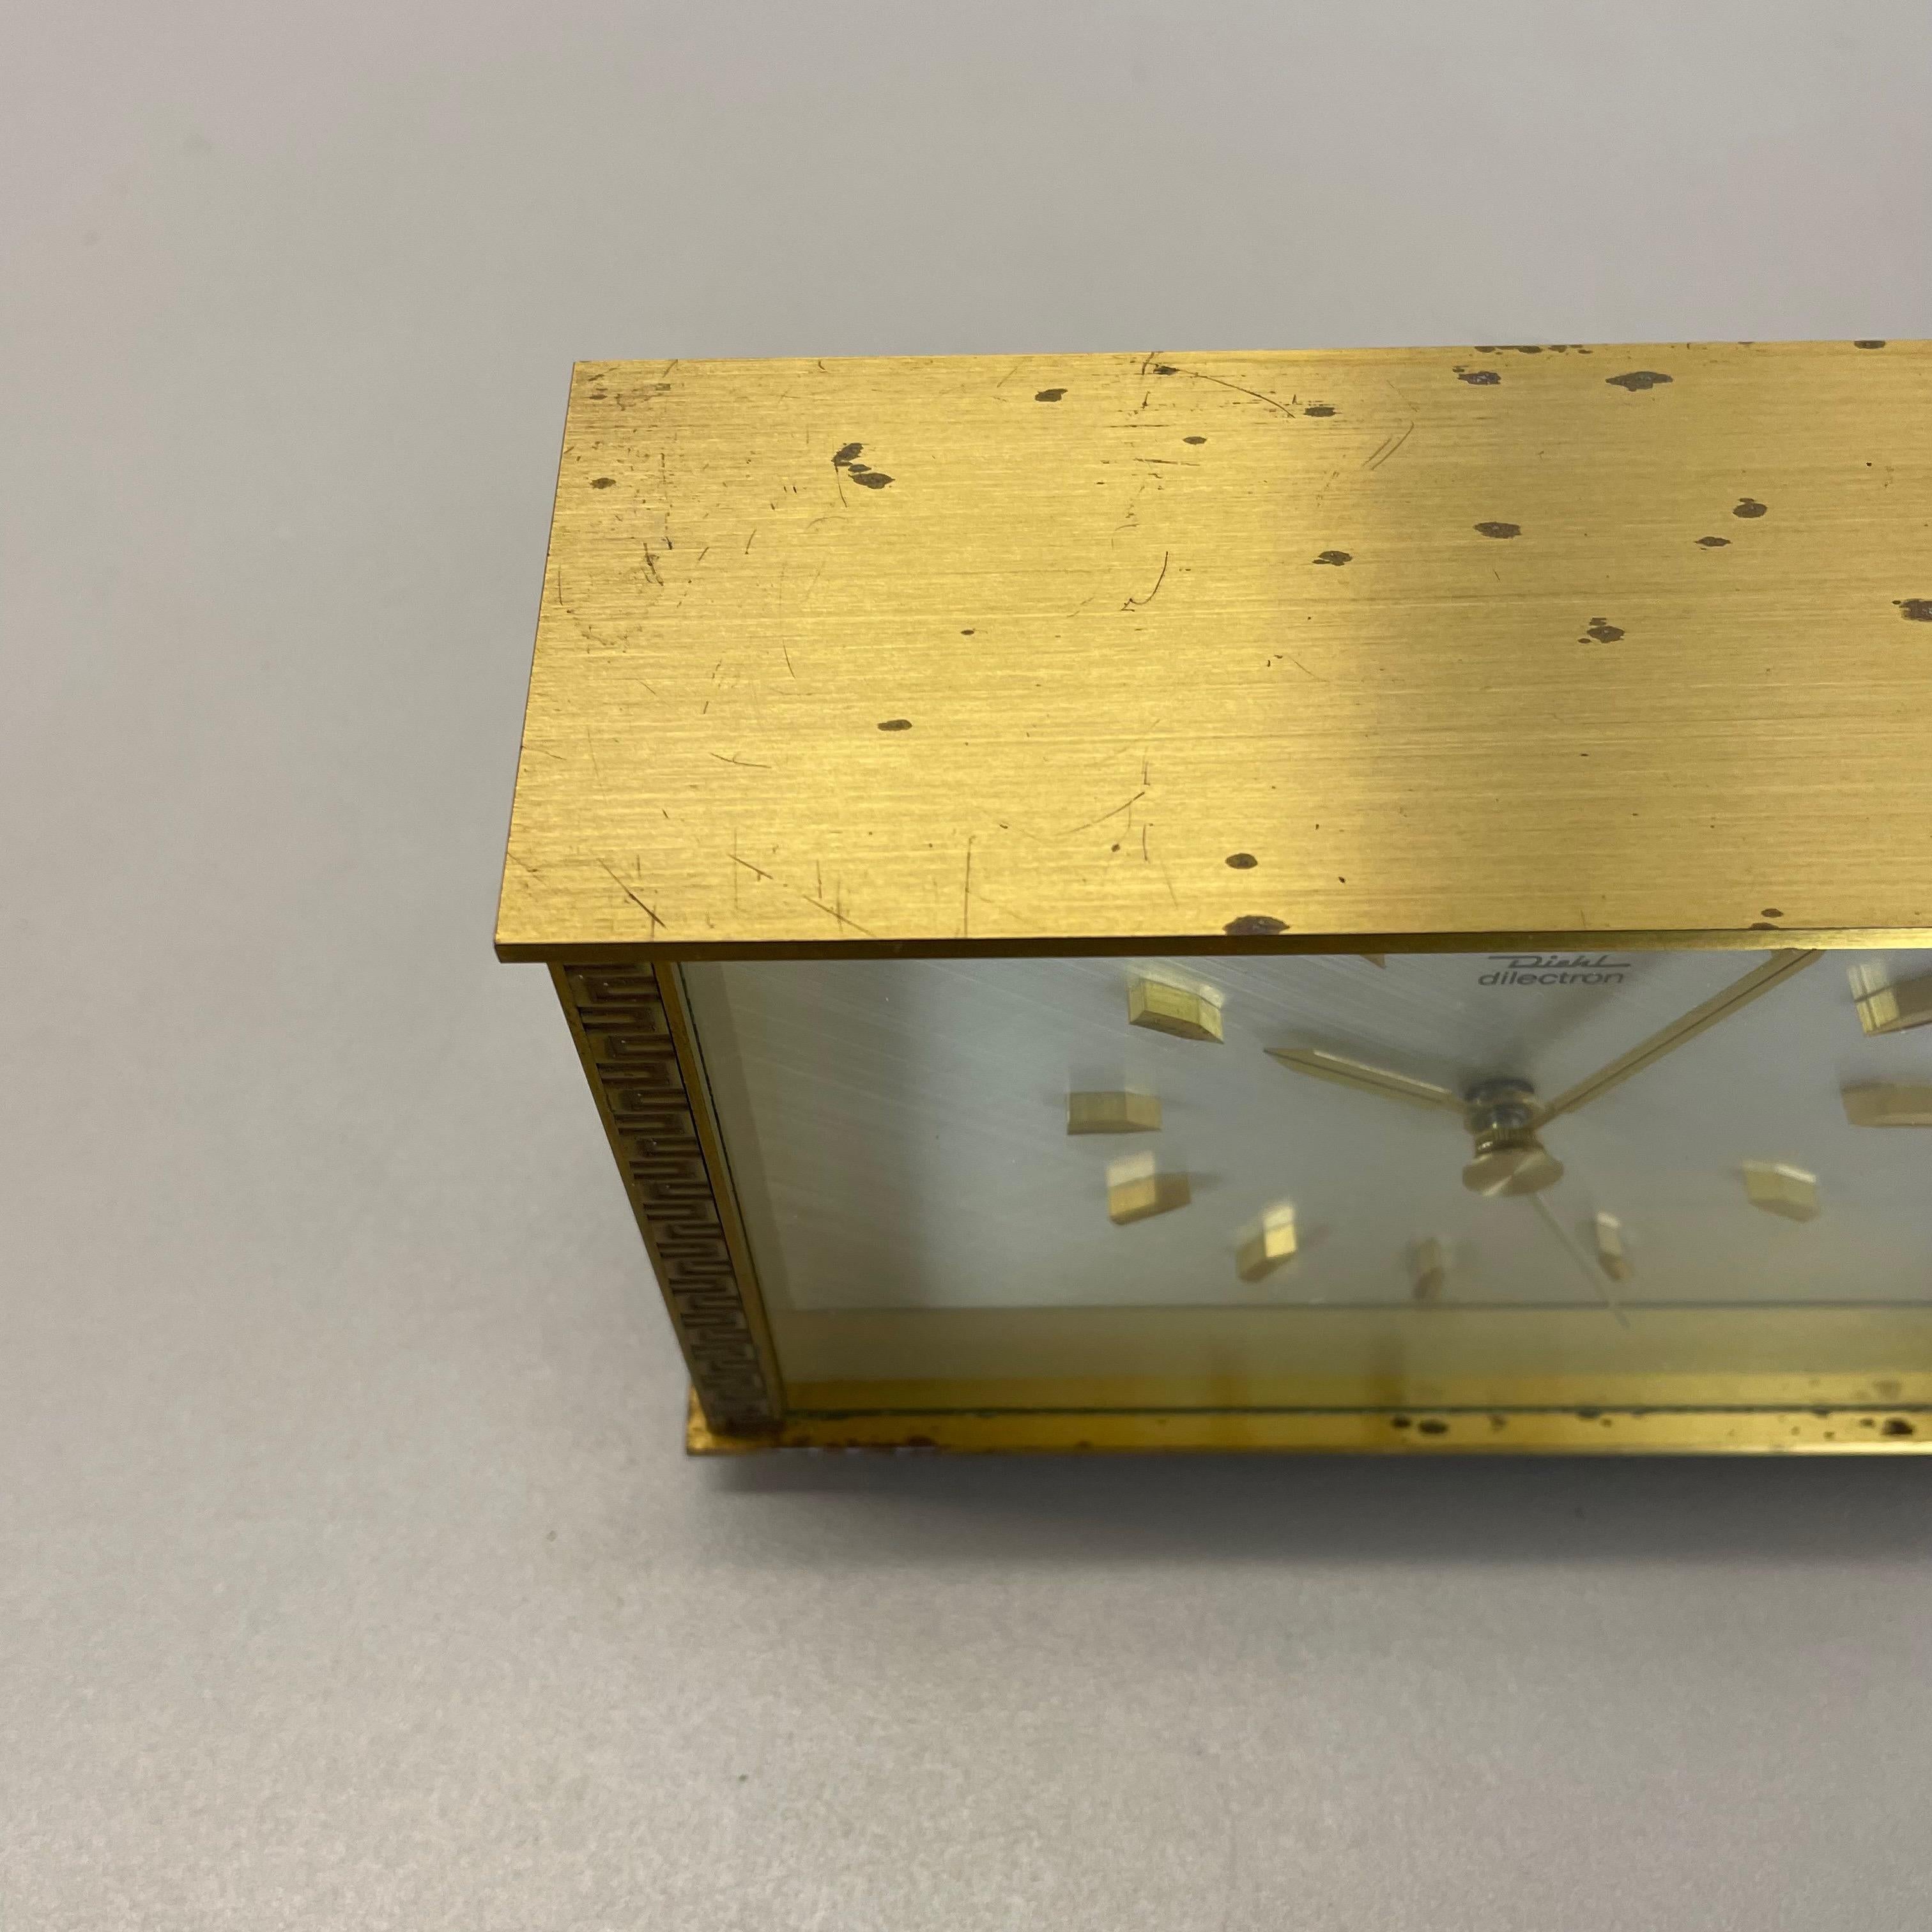 Vintage Modernist Metal Brass Table Clock by Diehl Dilectron, Germany 1960s For Sale 1